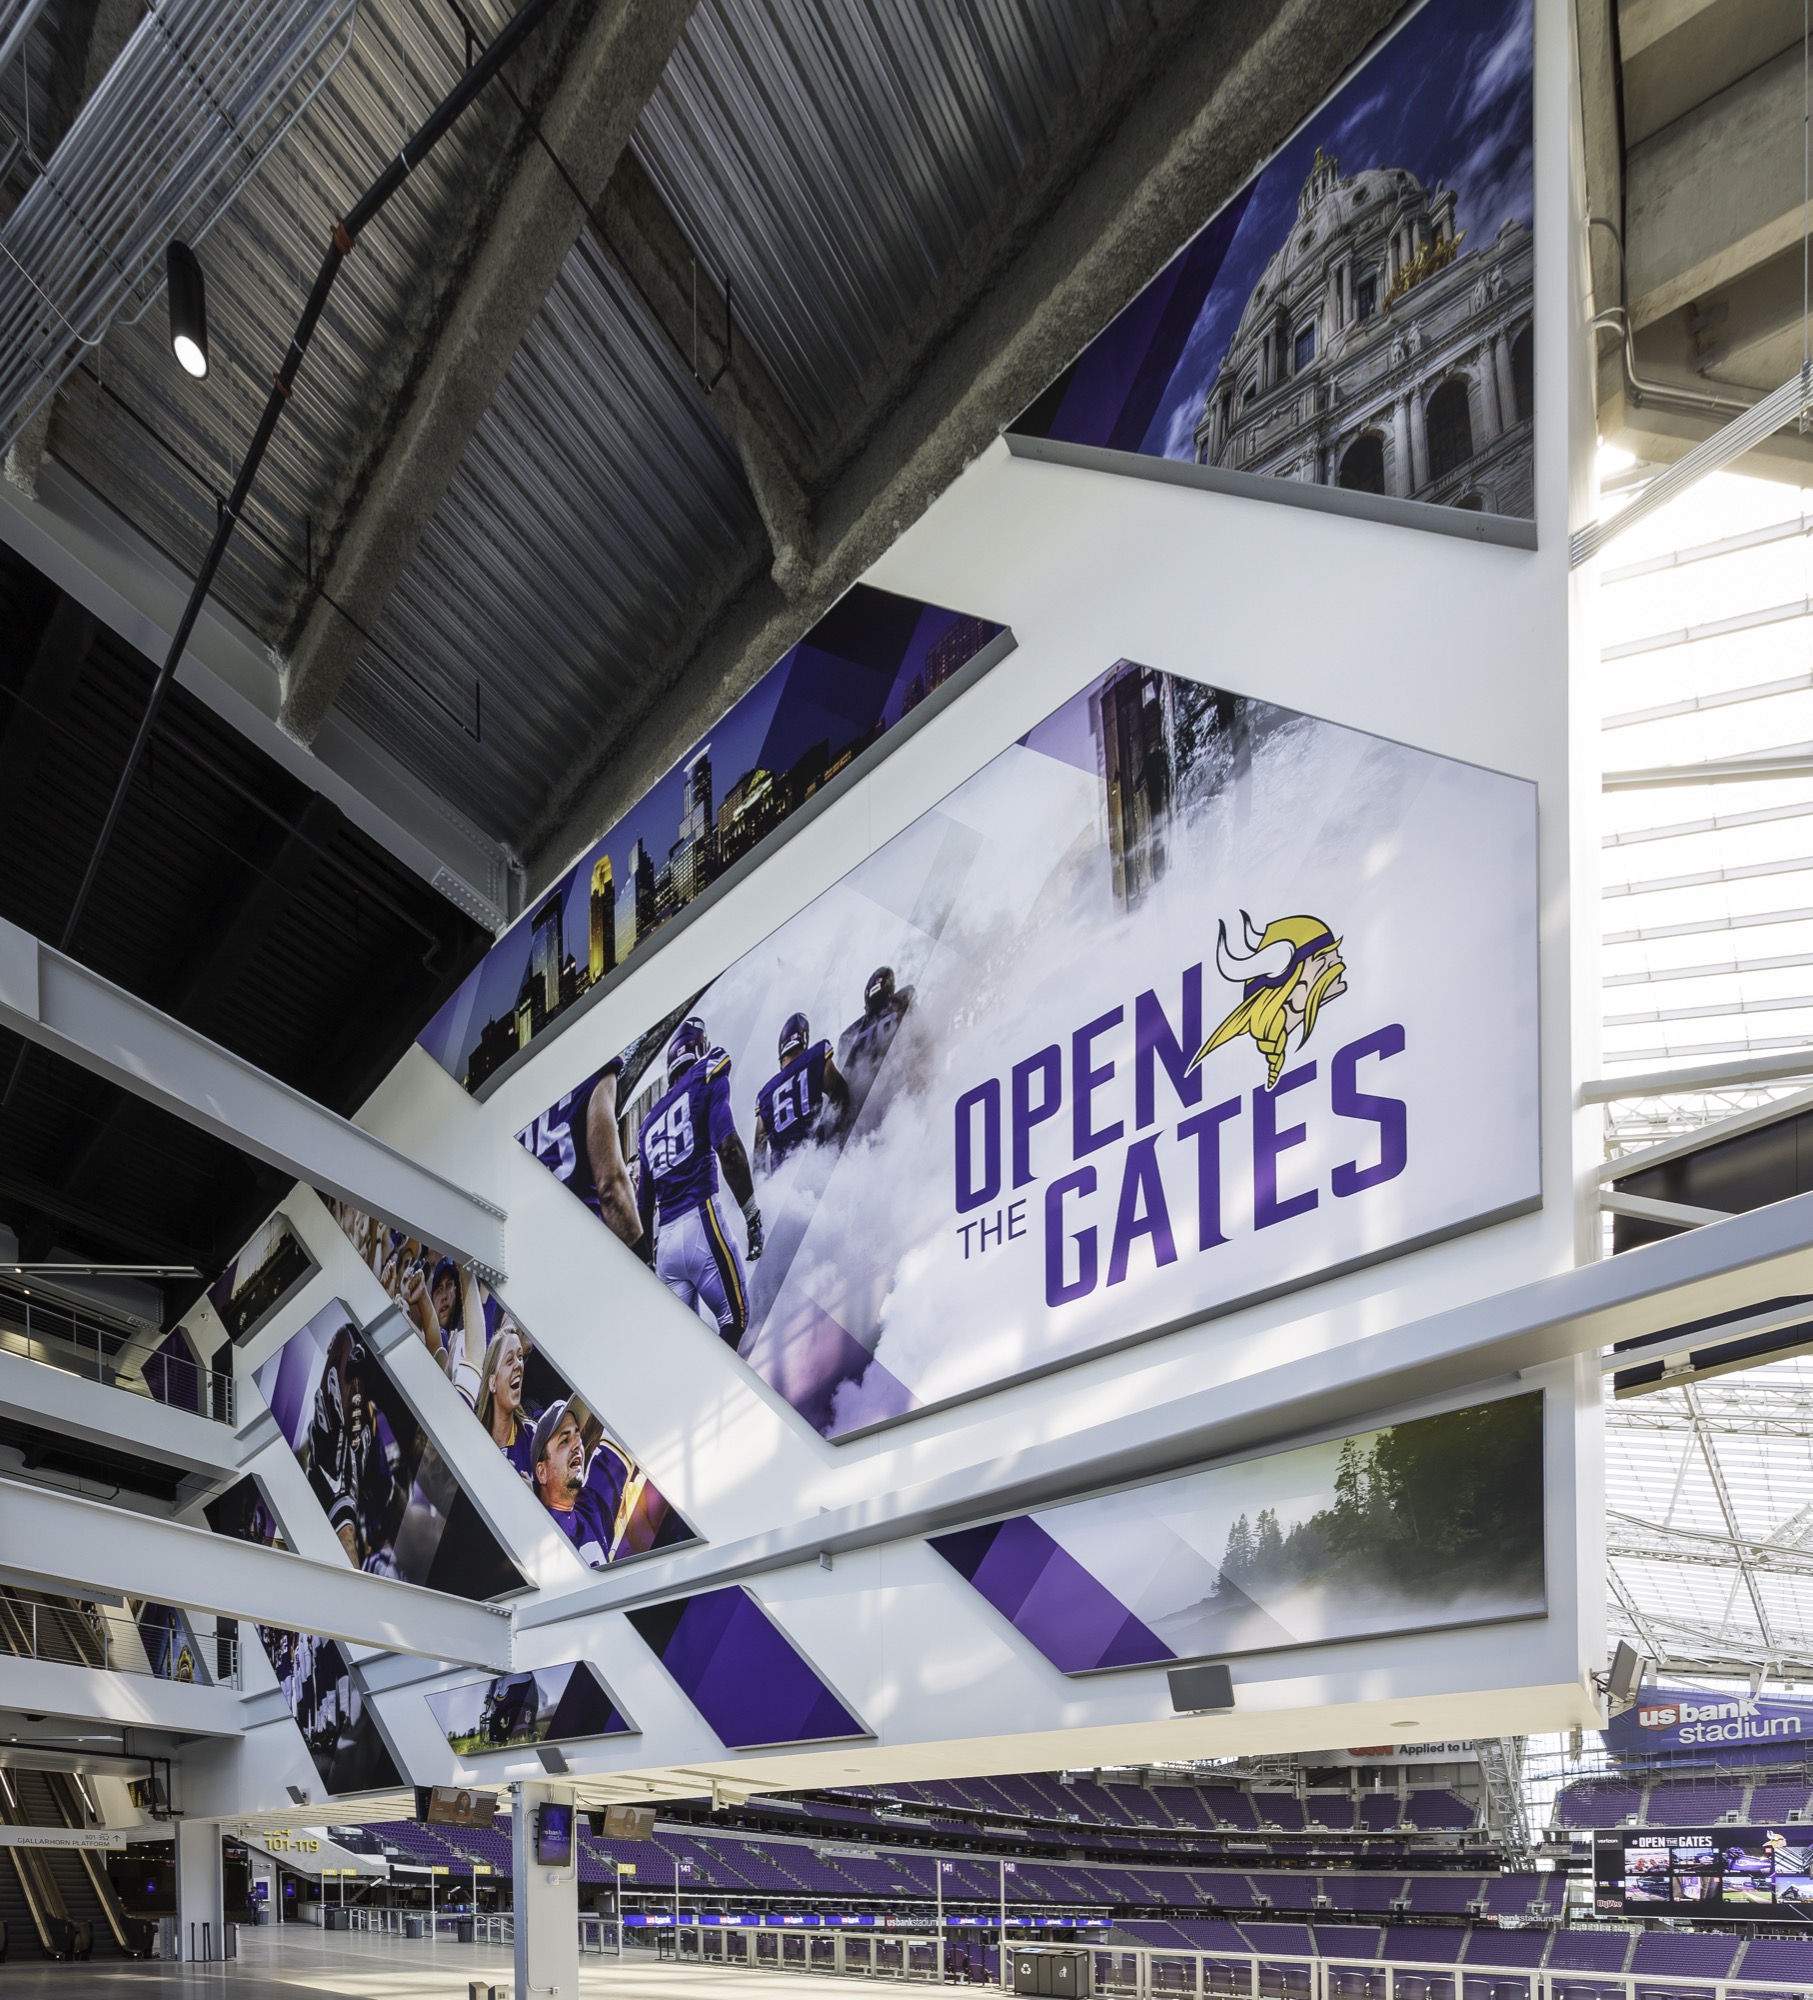 Very large Minnesota Vikings banner that reads "Open the Gates"